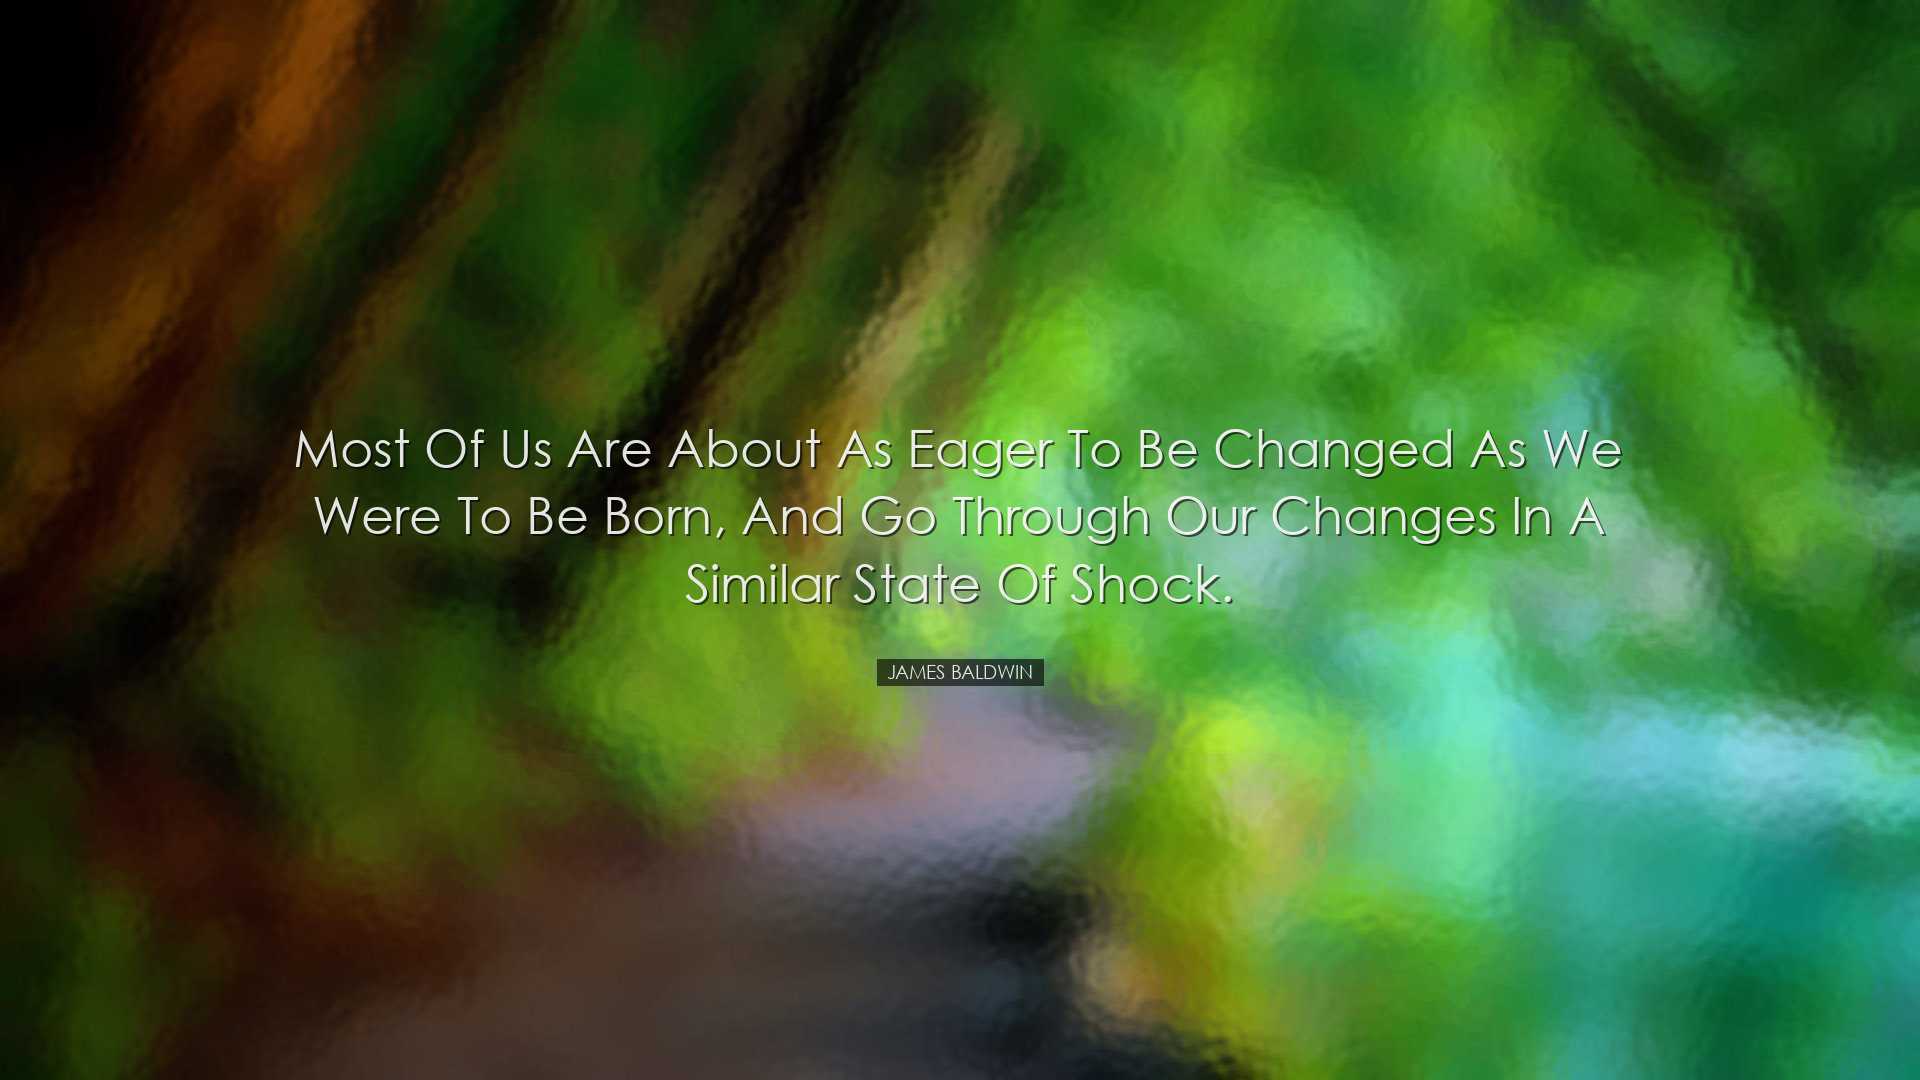 Most of us are about as eager to be changed as we were to be born,